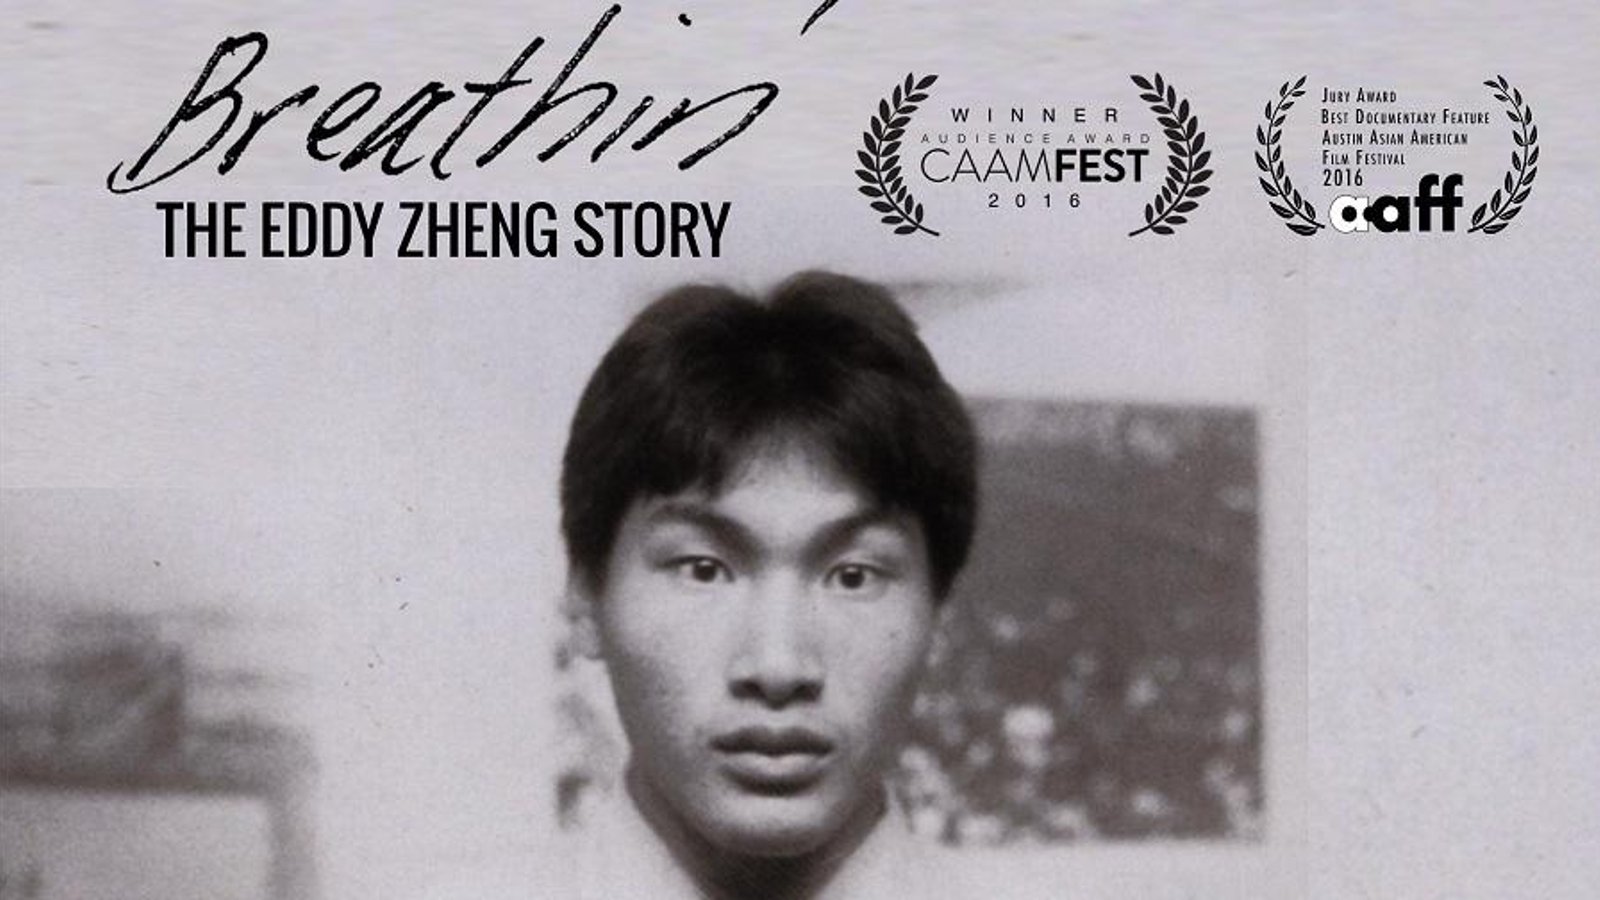 Breathin': The Eddy Zheng Story - The Youngest San Quentin State Prisoner On His Road to Freedom